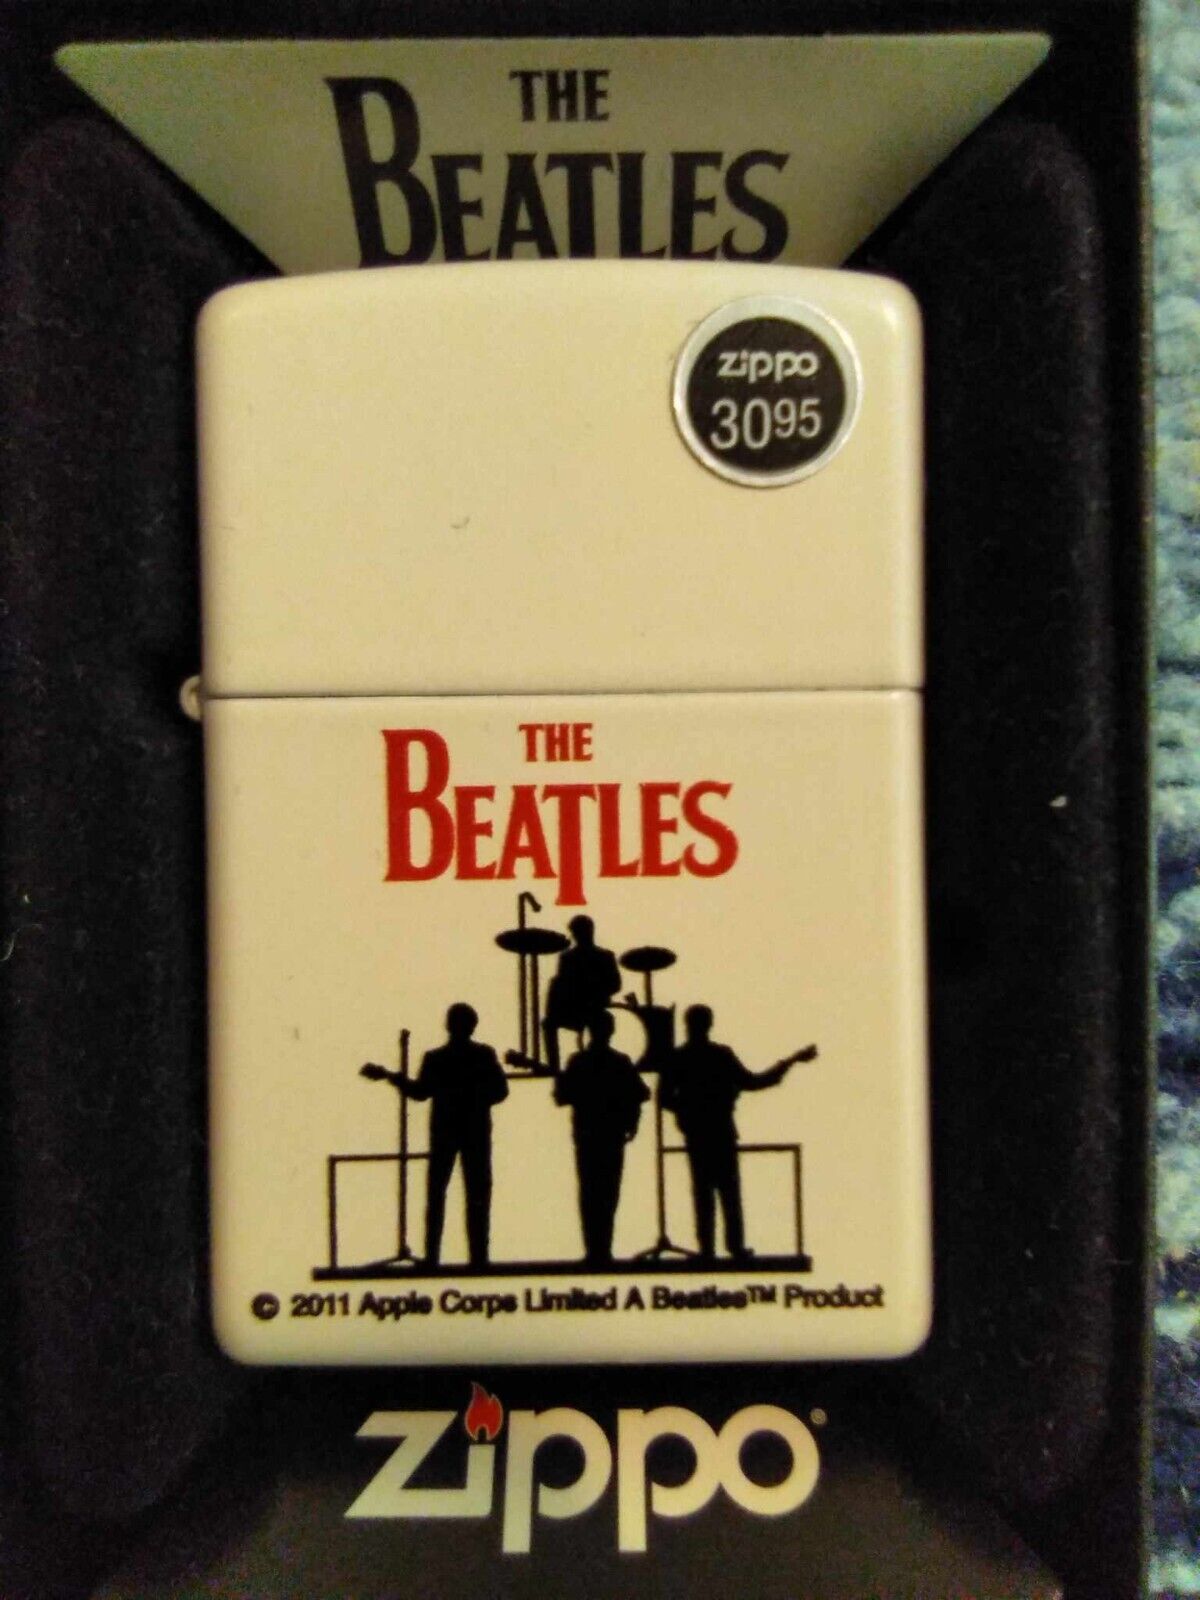 The Beatles Silhouette Zippo lighter New in Box - PRICE REDUCED